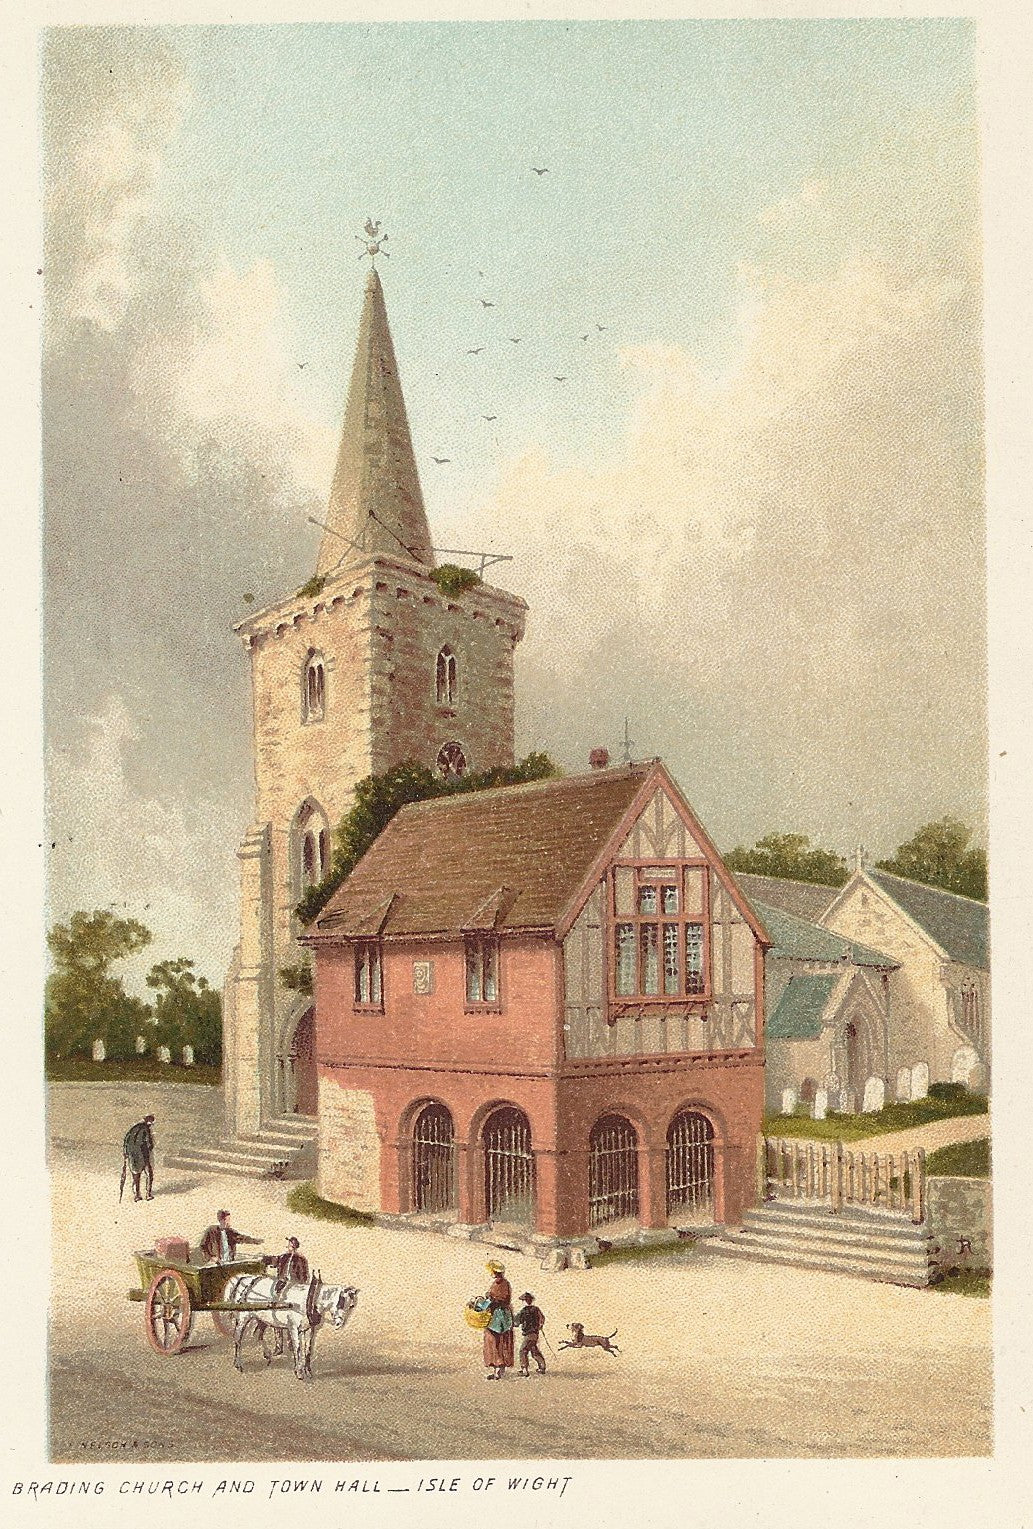 Brading Church & Town Hall Isle of Wight antique print